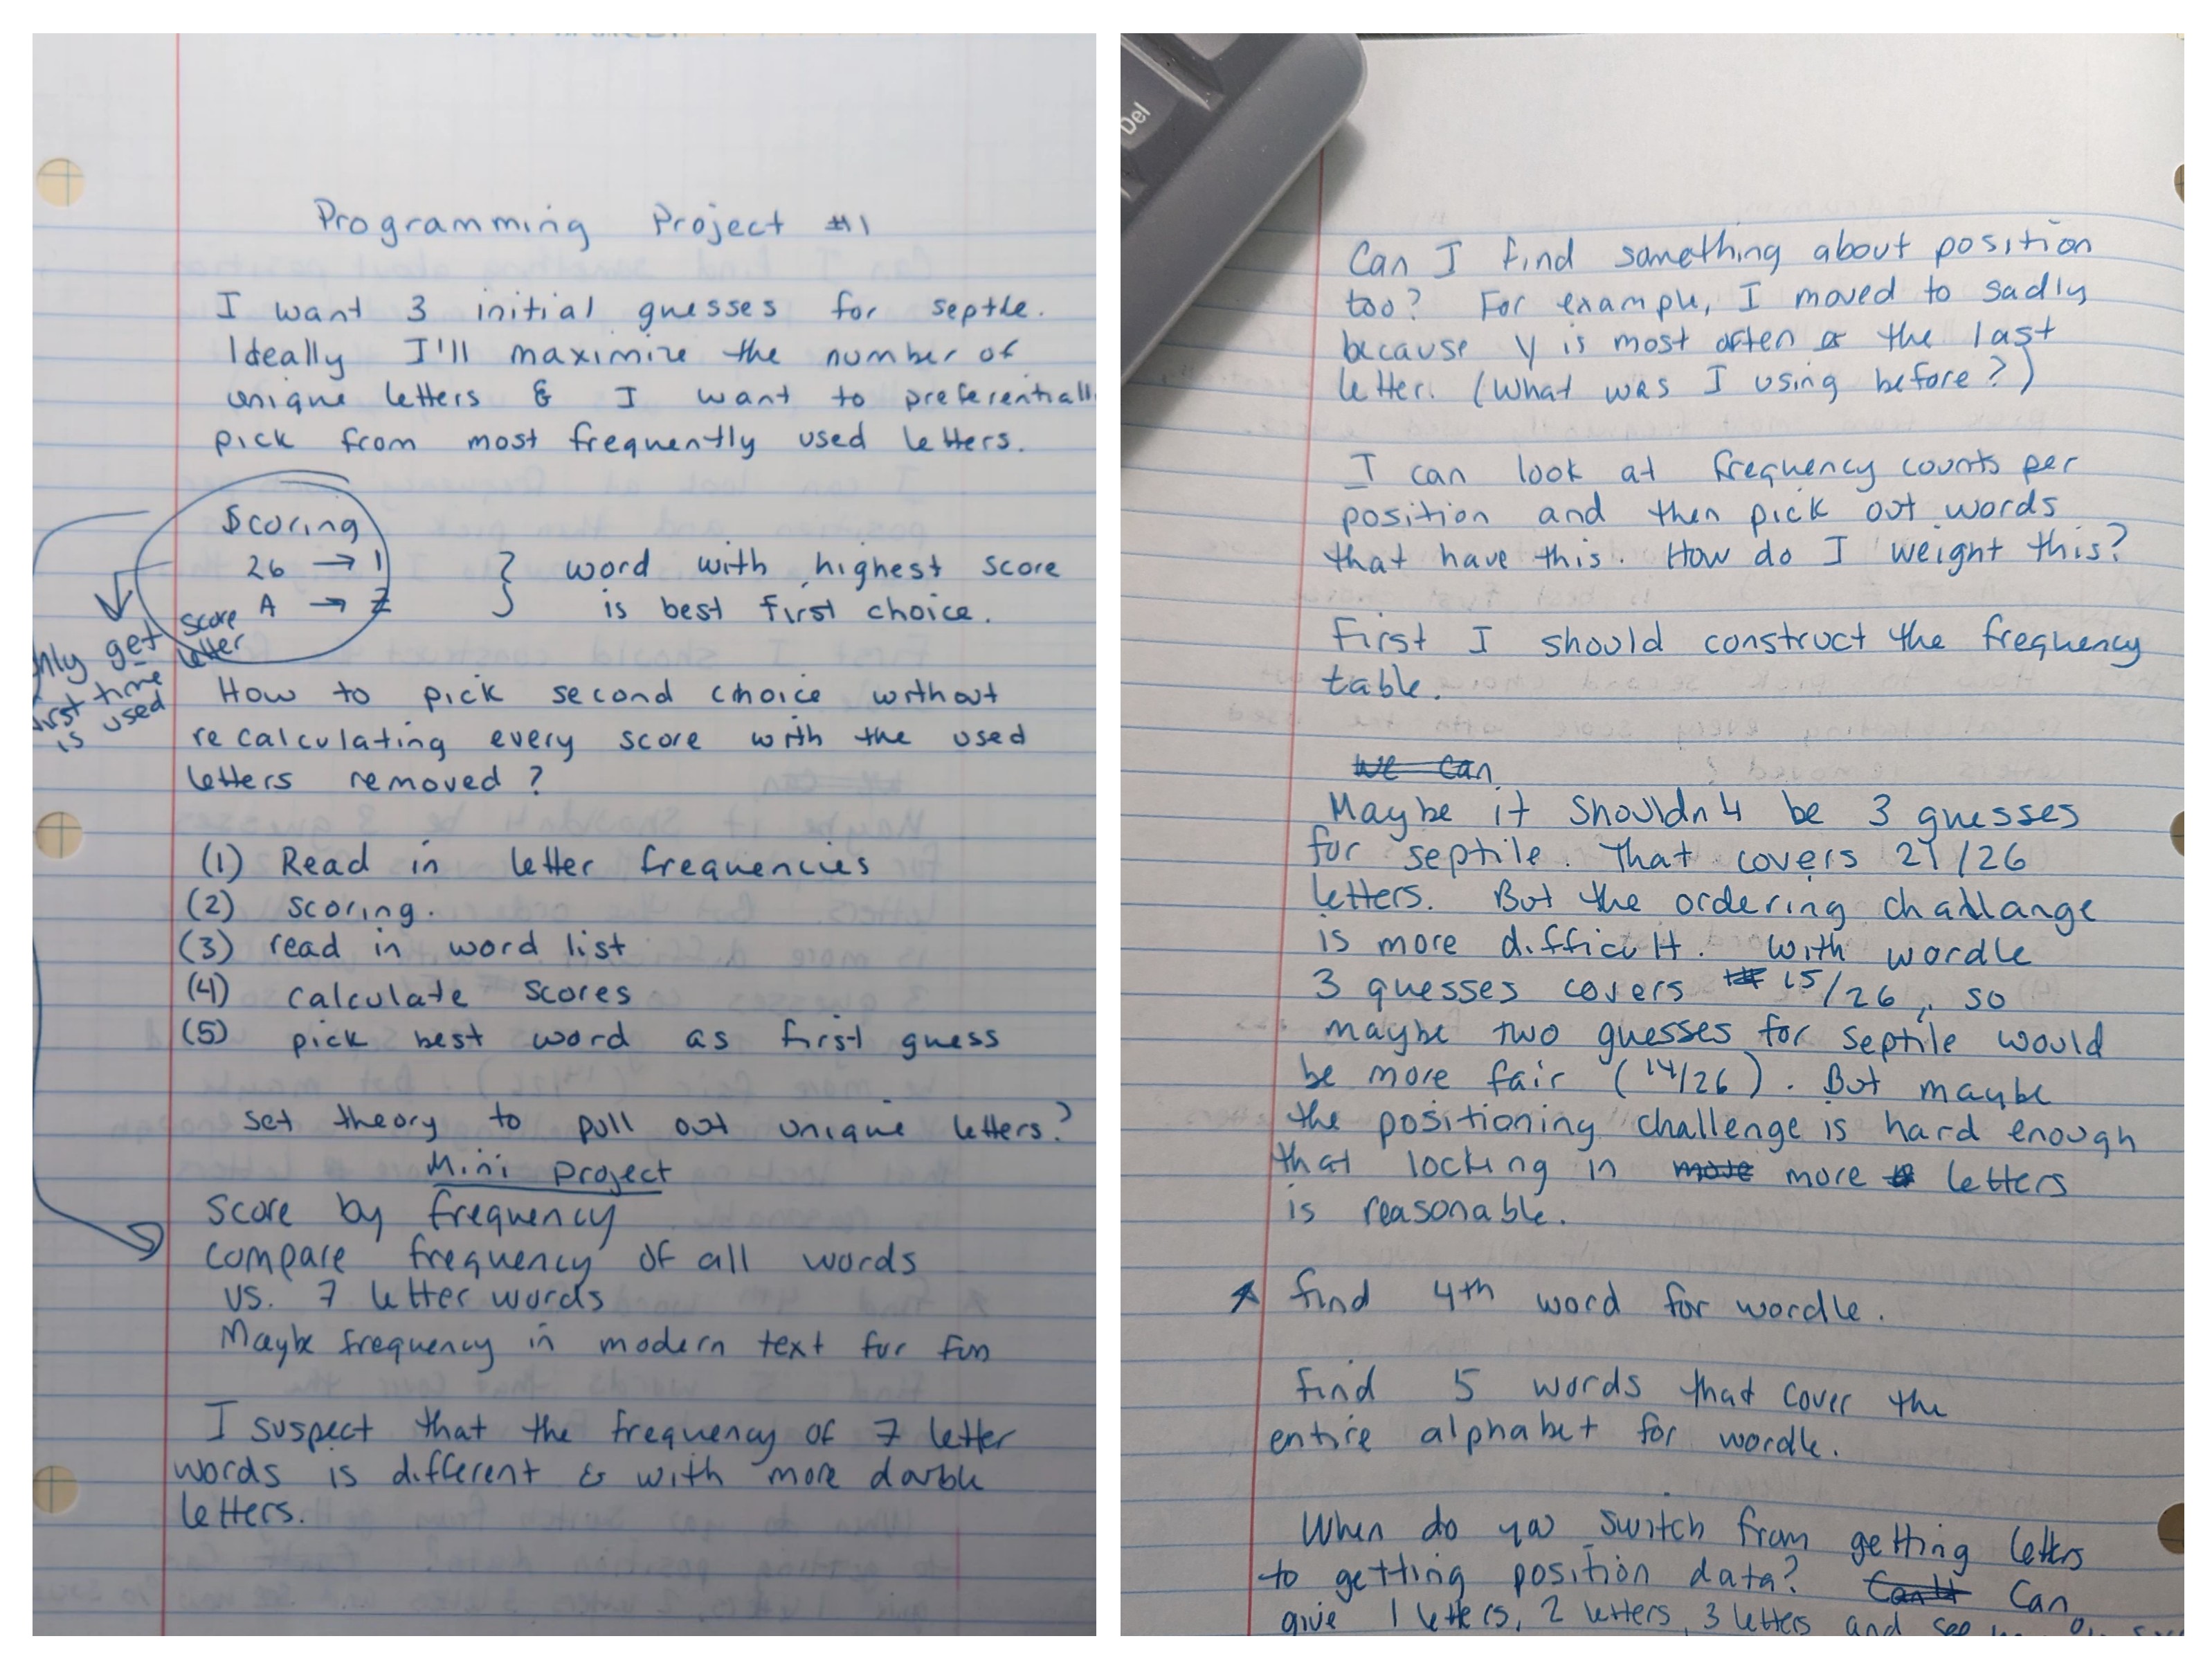 Two handwritten pages entitled "Programming Project 1"